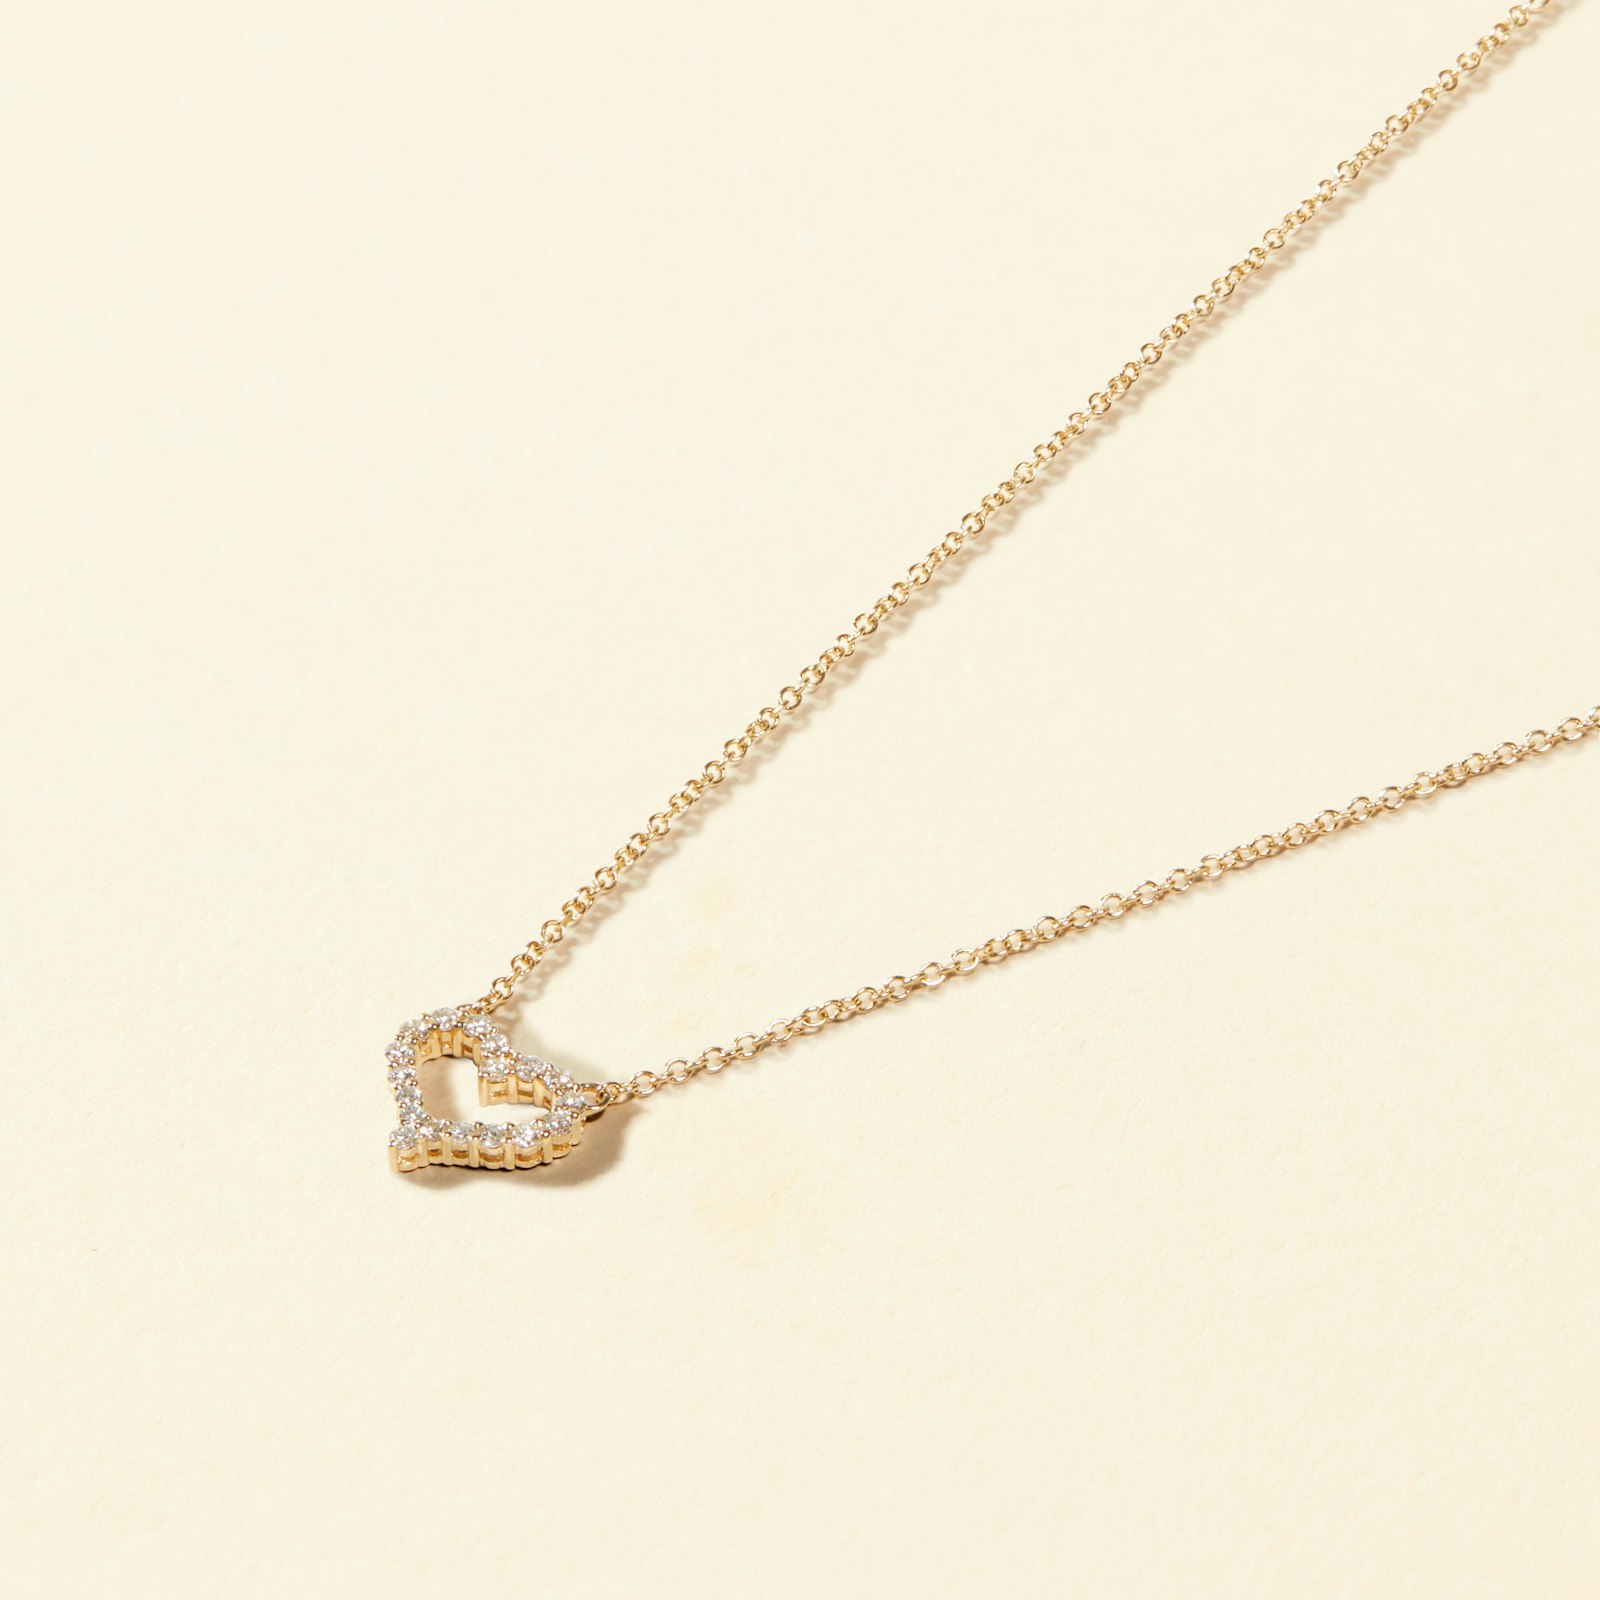 Swoon Diamond Heart Necklace_Yellow Gold_Jewelry_Product_1x1_0153.jpg